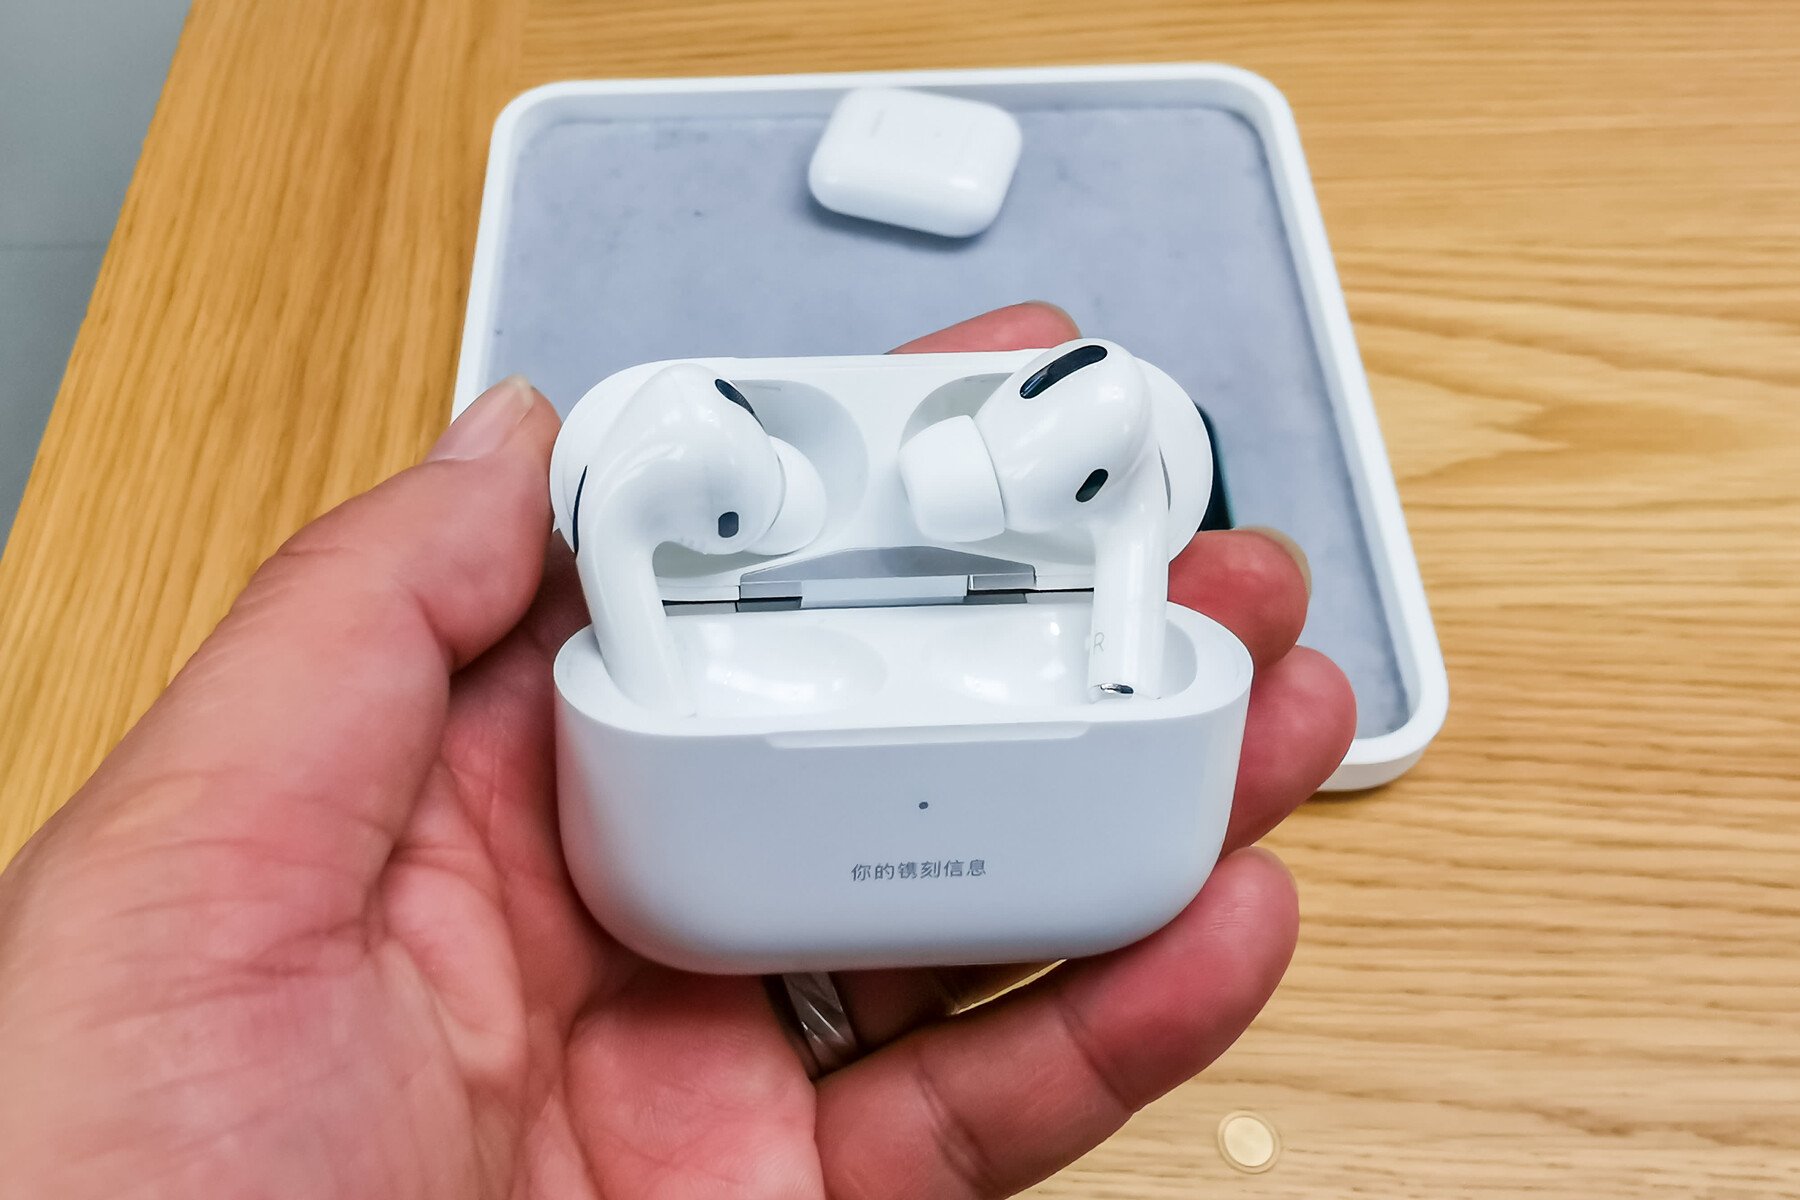 How To Change Airpod Pros To Noise Cancelling